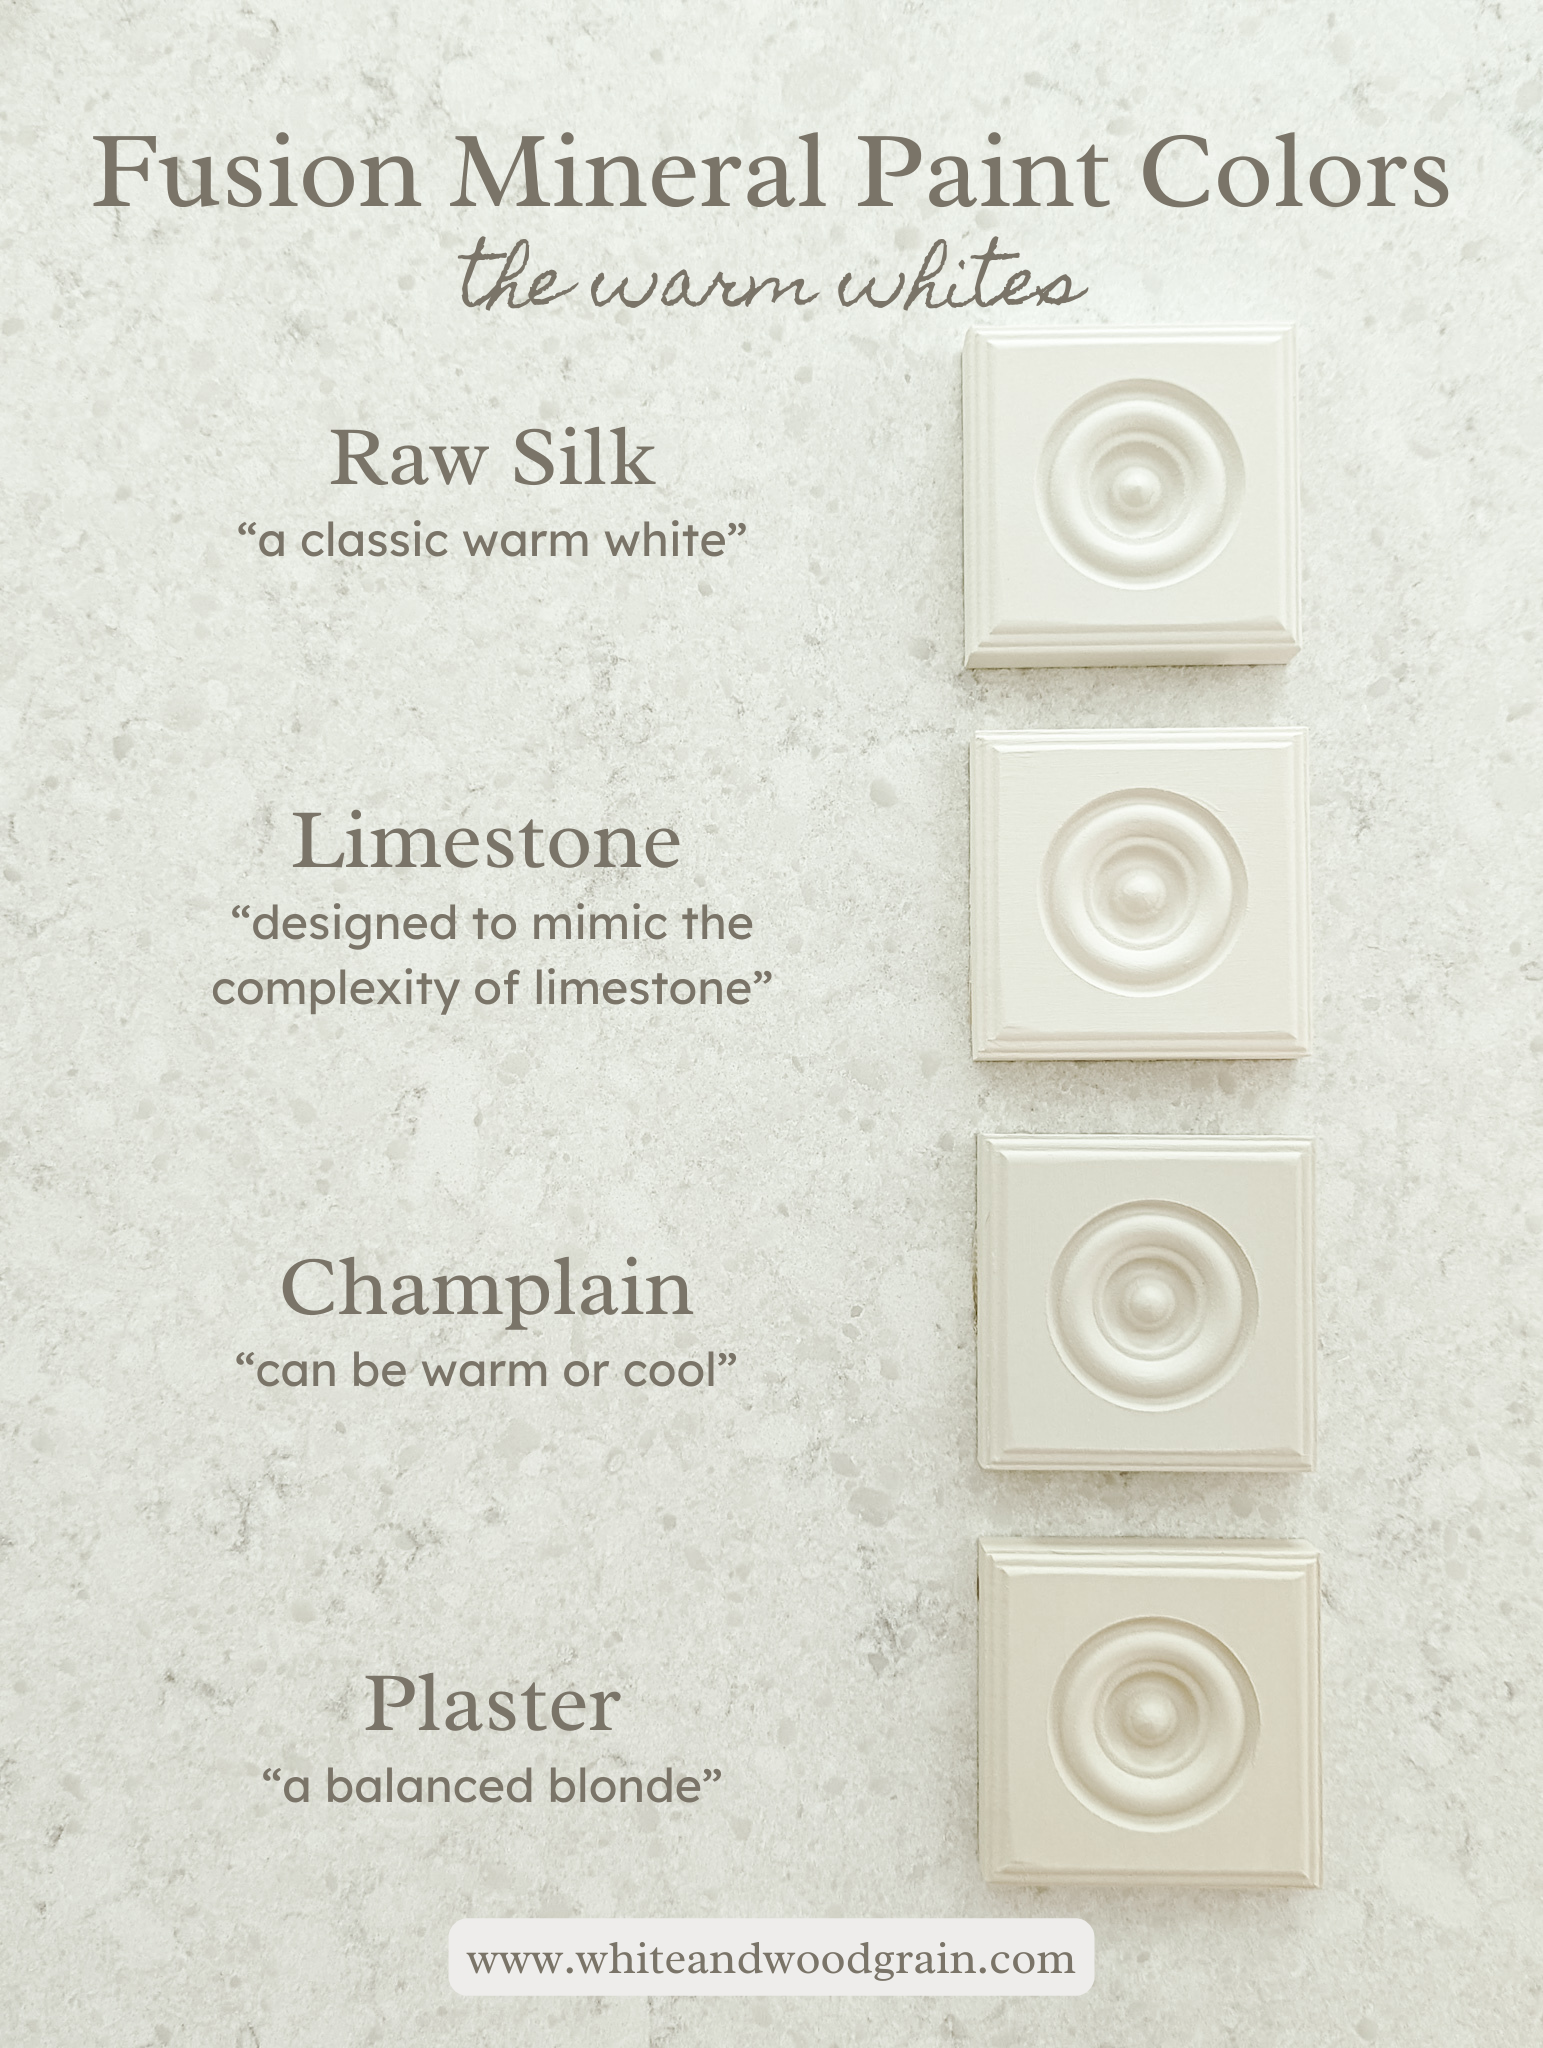 sampling all the warm white Fusion Mineral paint colors: raw silk, limestone, champlain, and plaster